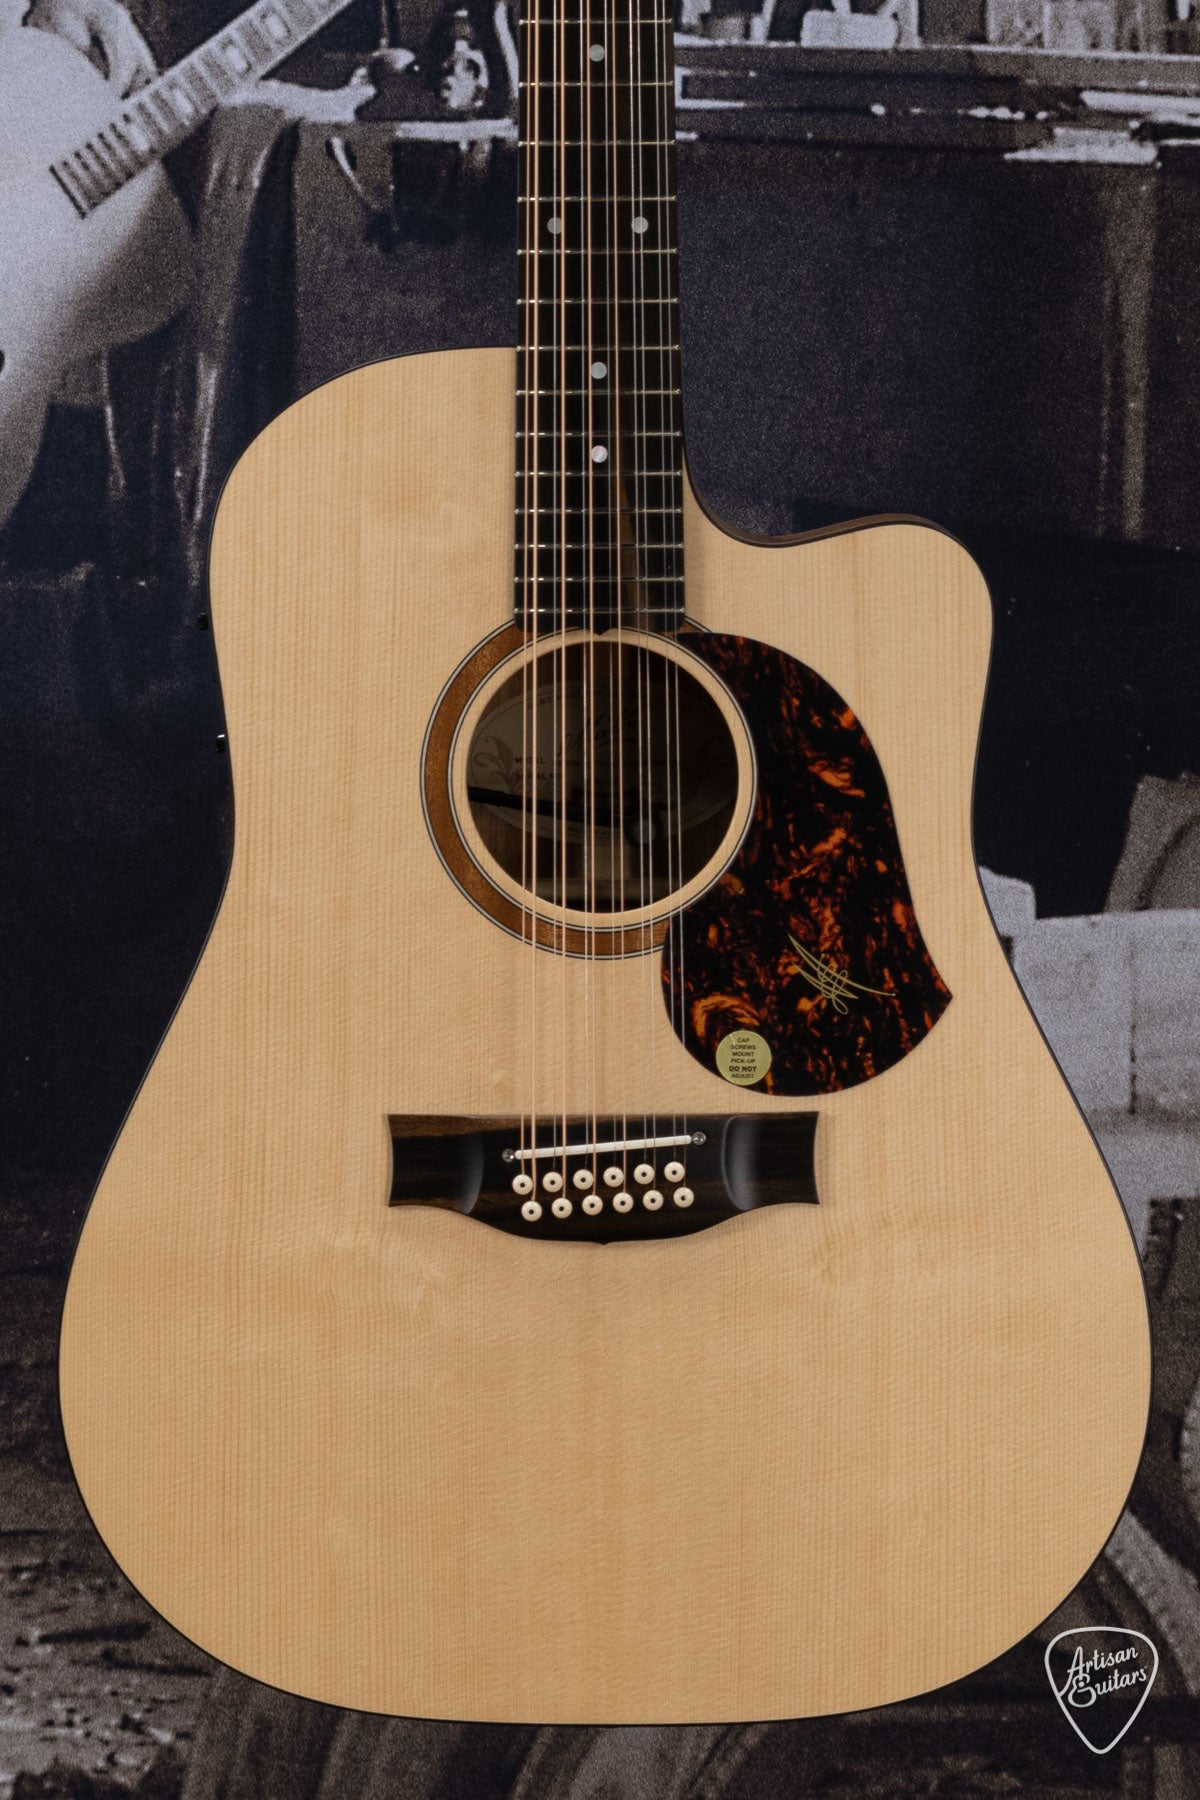 Maton Guitars Solid Road Series SRS-70C-12 String Dreadnought - 16215